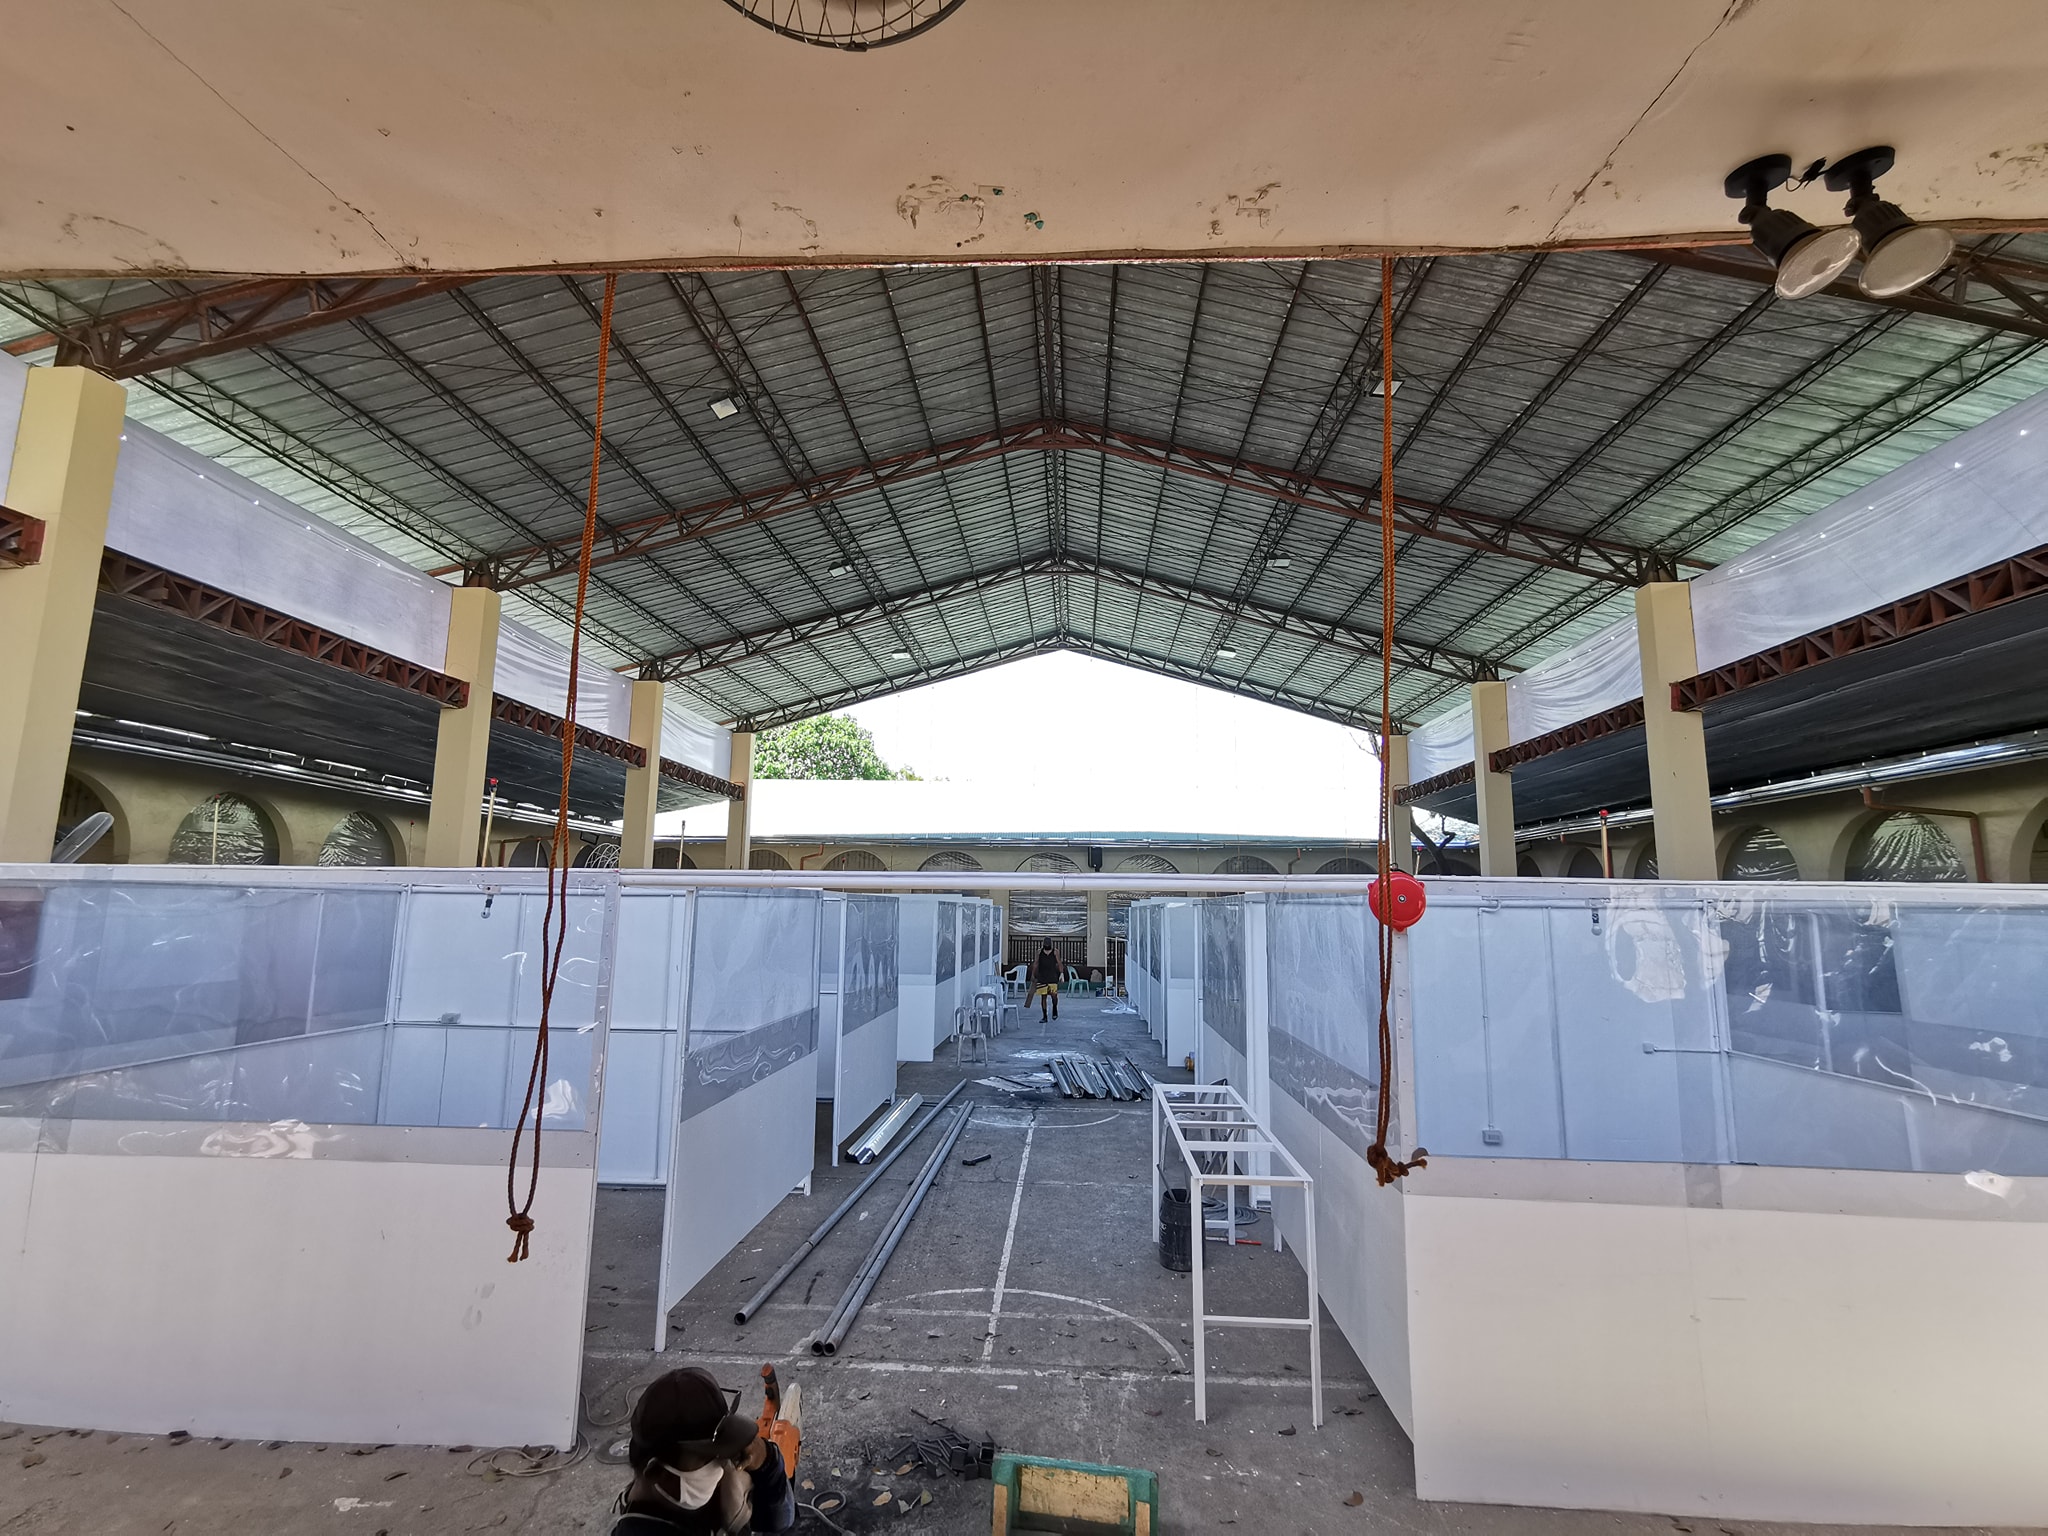 The ongoing preparation of Mandaue City Central Quarantine Facility at the city's central elementary school is now 75-80 percent complete as of April 23. (Photo courtesy of Councilor Nerissa Soon-Ruiz)